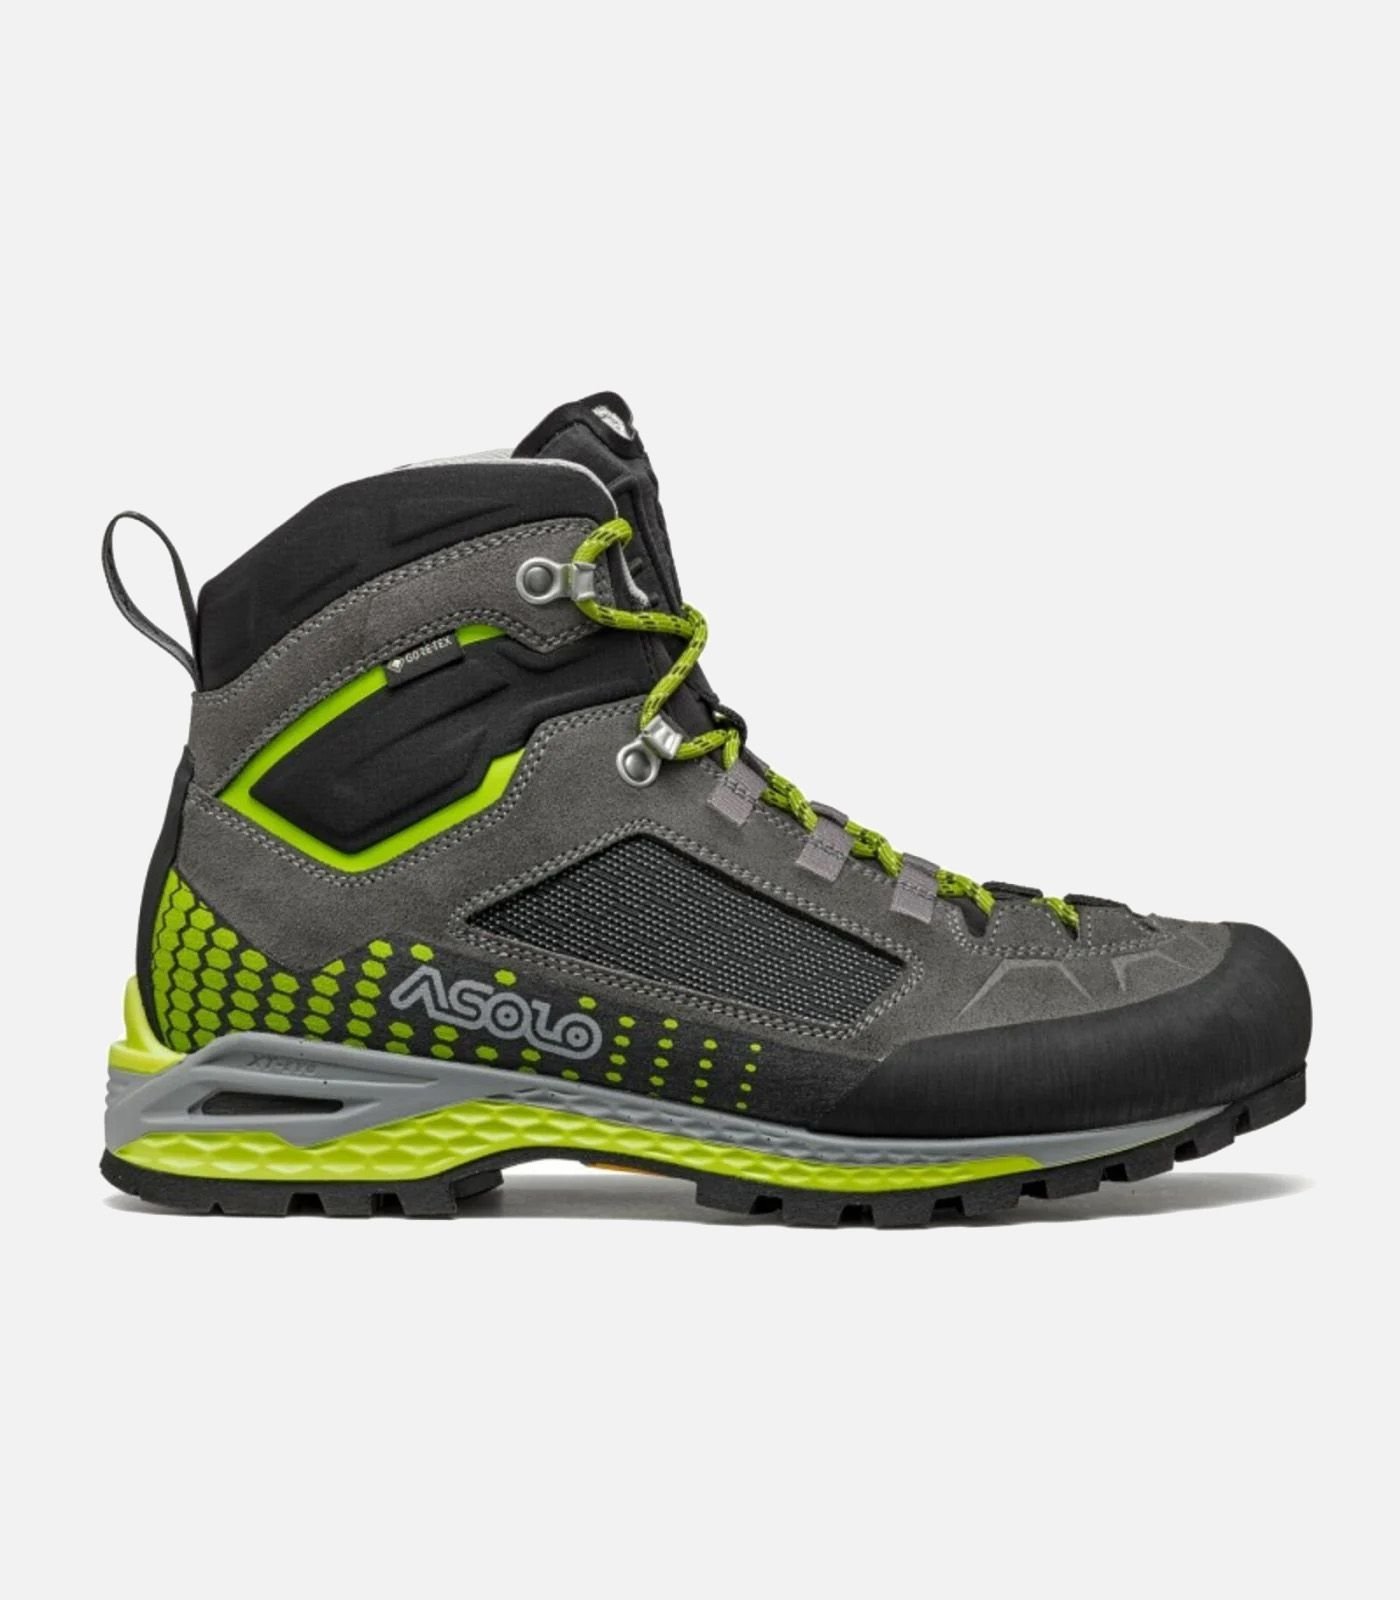 ASOLO hiking and trekking shoes